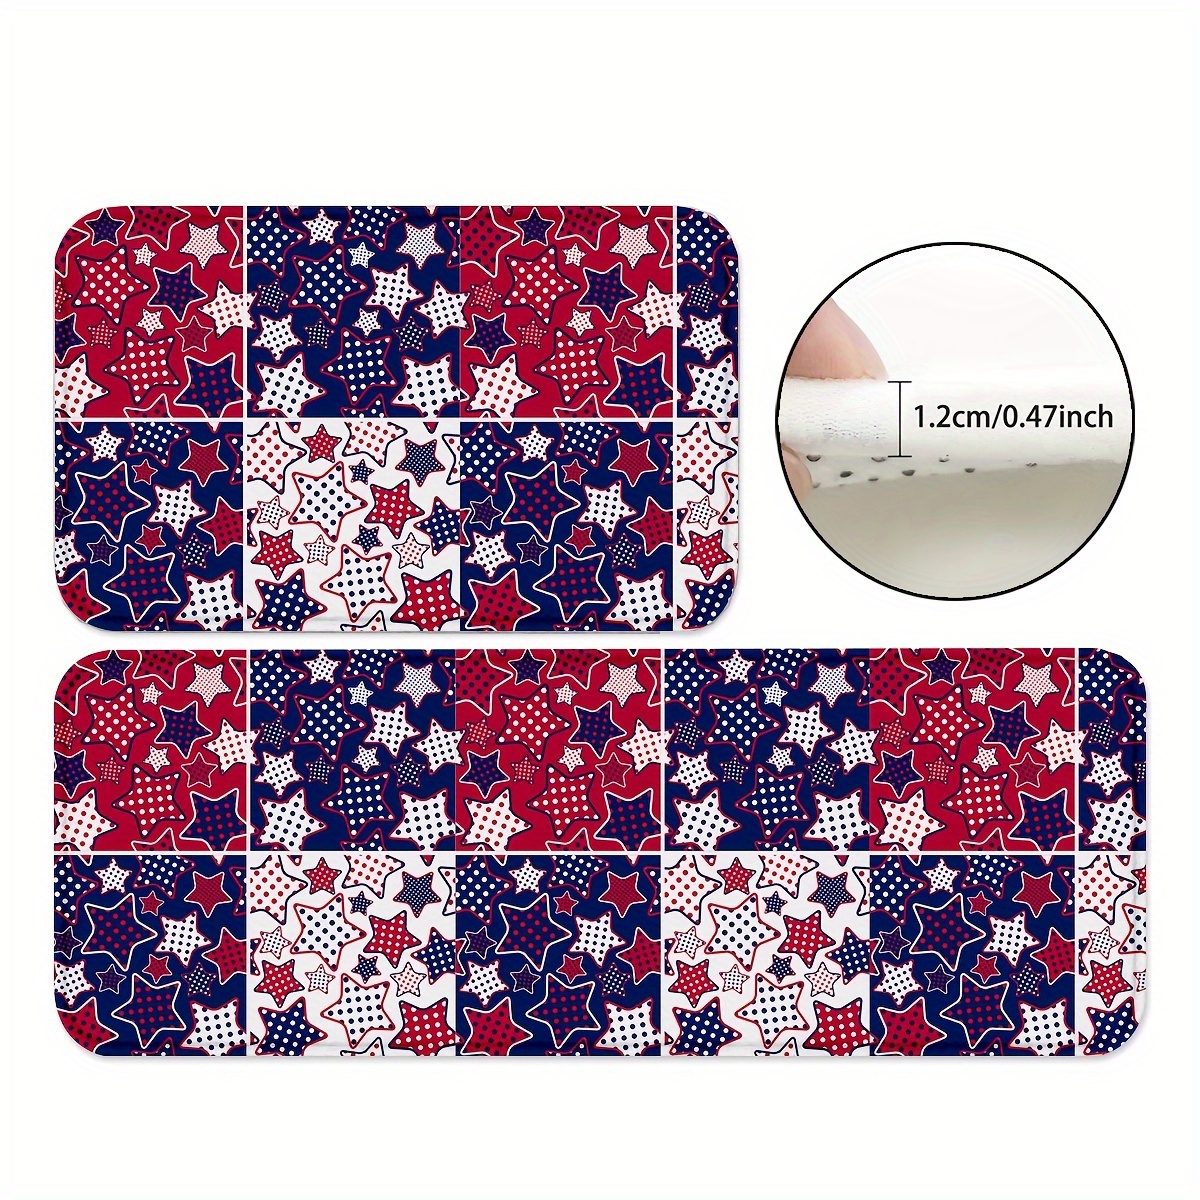 

1/2pcs, Area Rug, Independence Day Kitchen Mats, Non-slip And Durable Bathroom Pads, Comfortable Standing Runner Rugs, Carpets For Kitchen, Home, Office, Sink, Laundry Room, Bathroom, Spring Decor